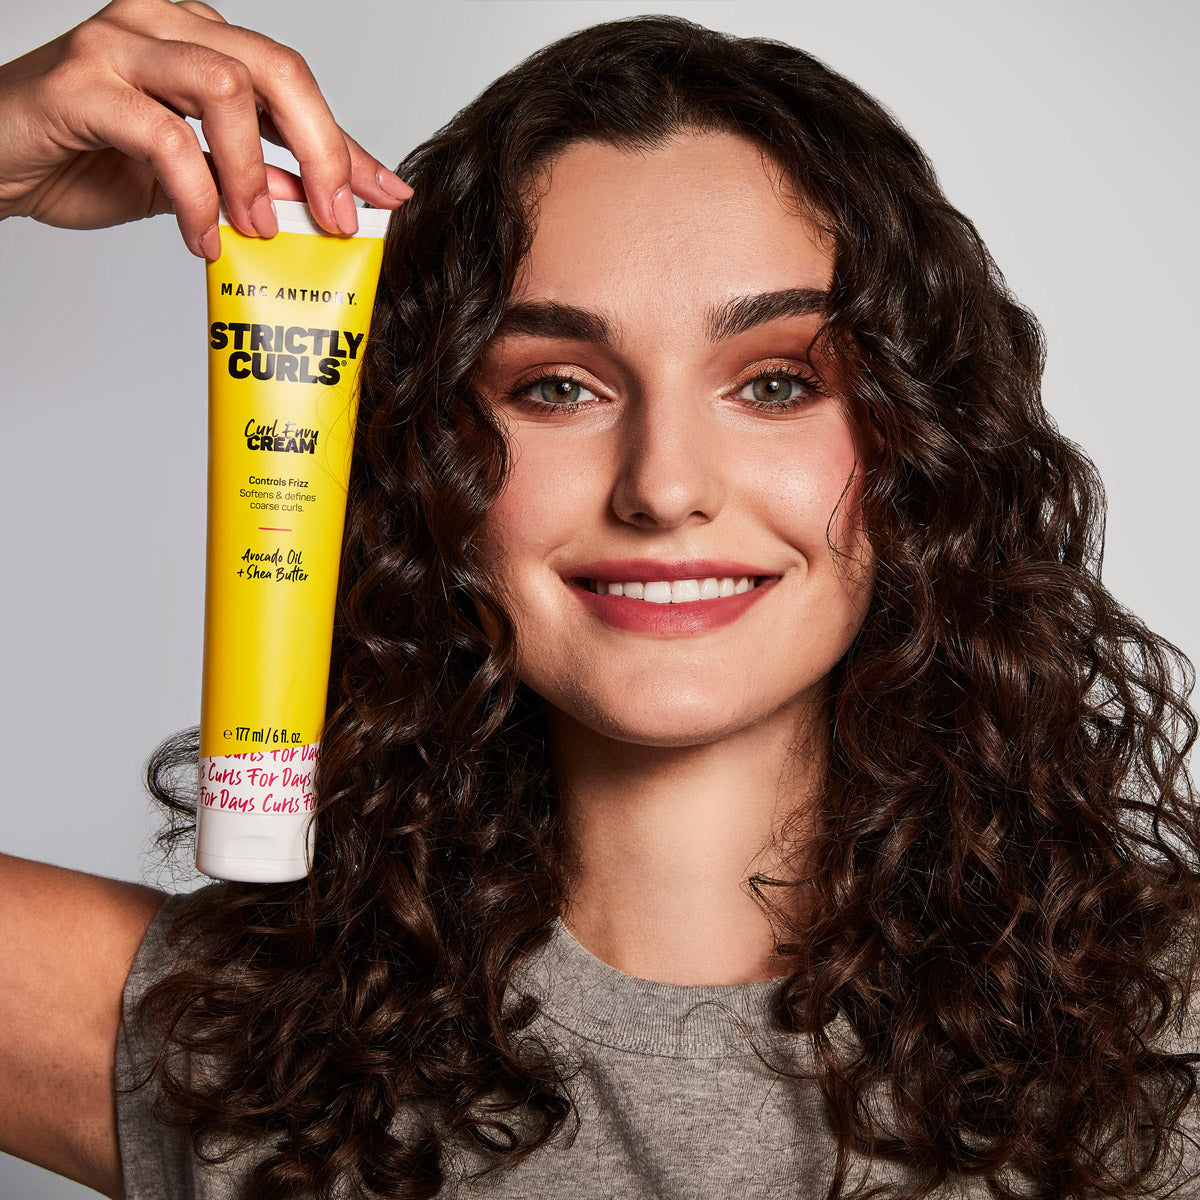 Strictly Curls® Curl Envy Cream - Marc Anthony